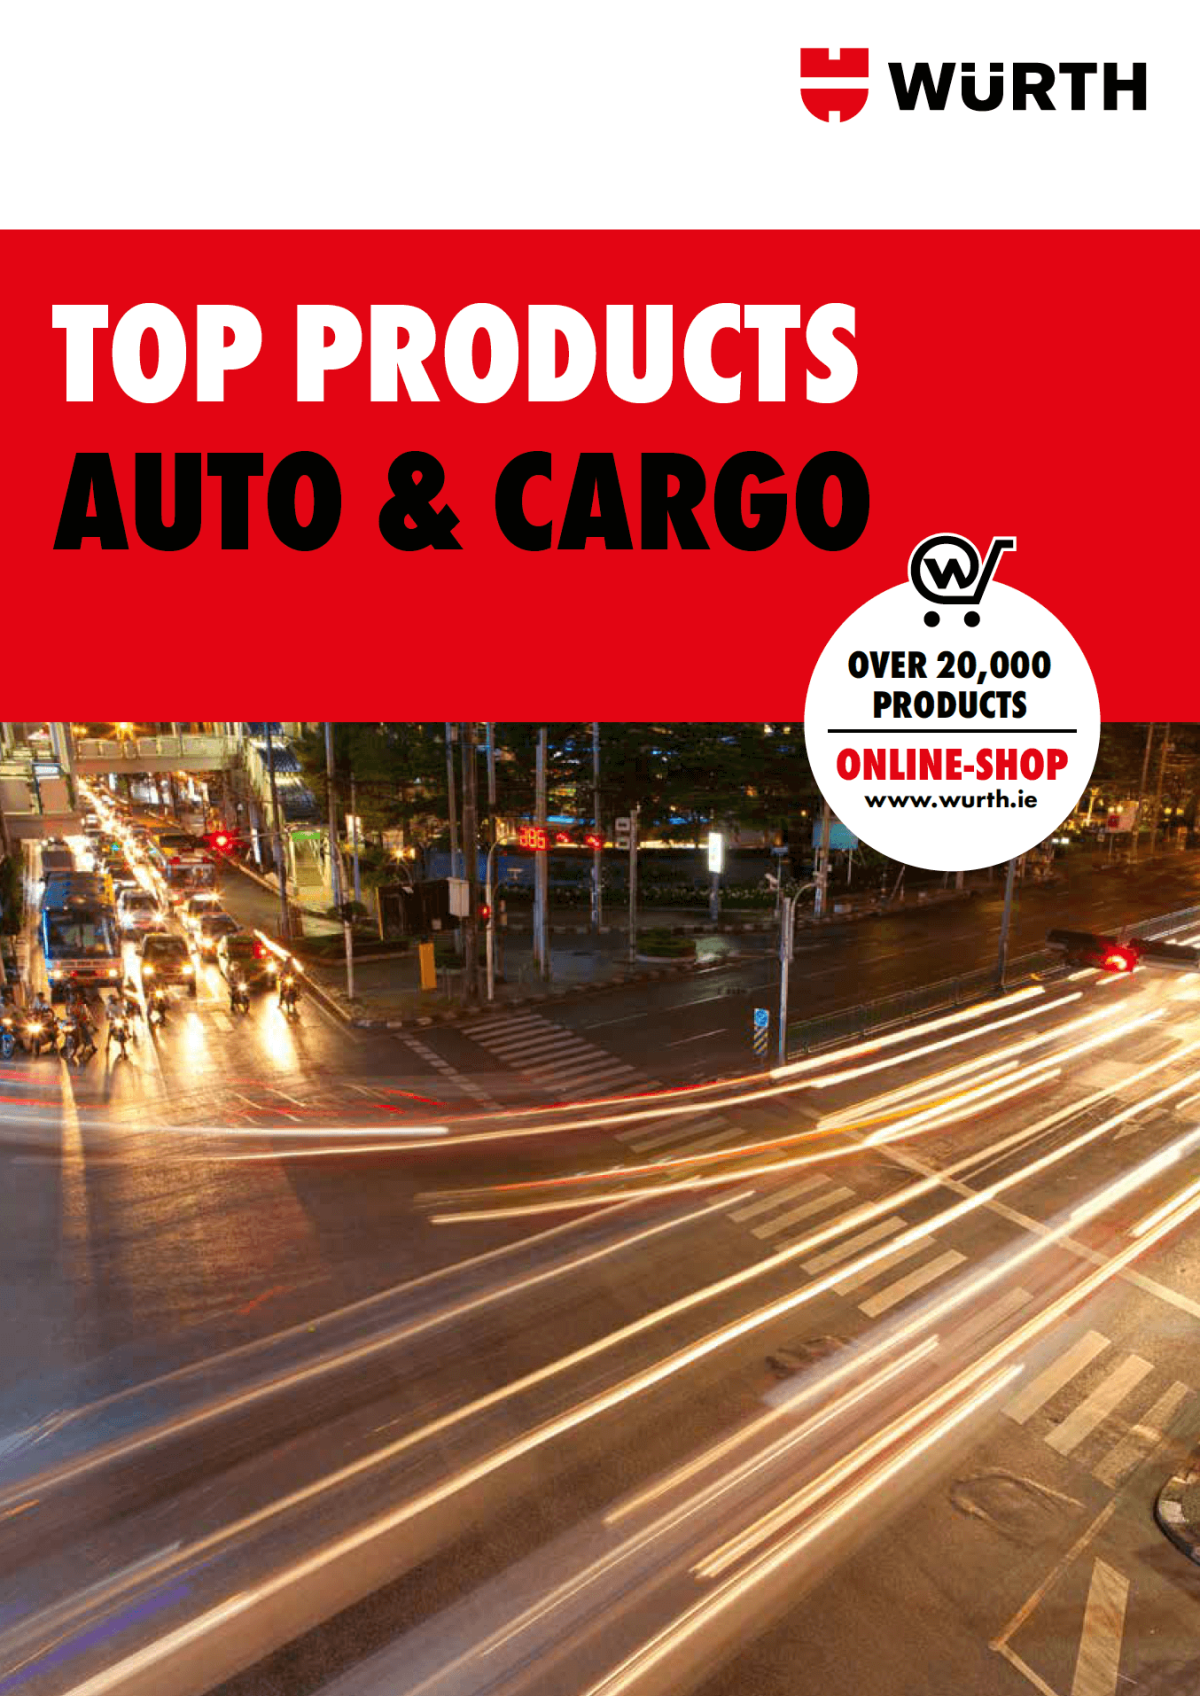 Top Products Auto & Cargo